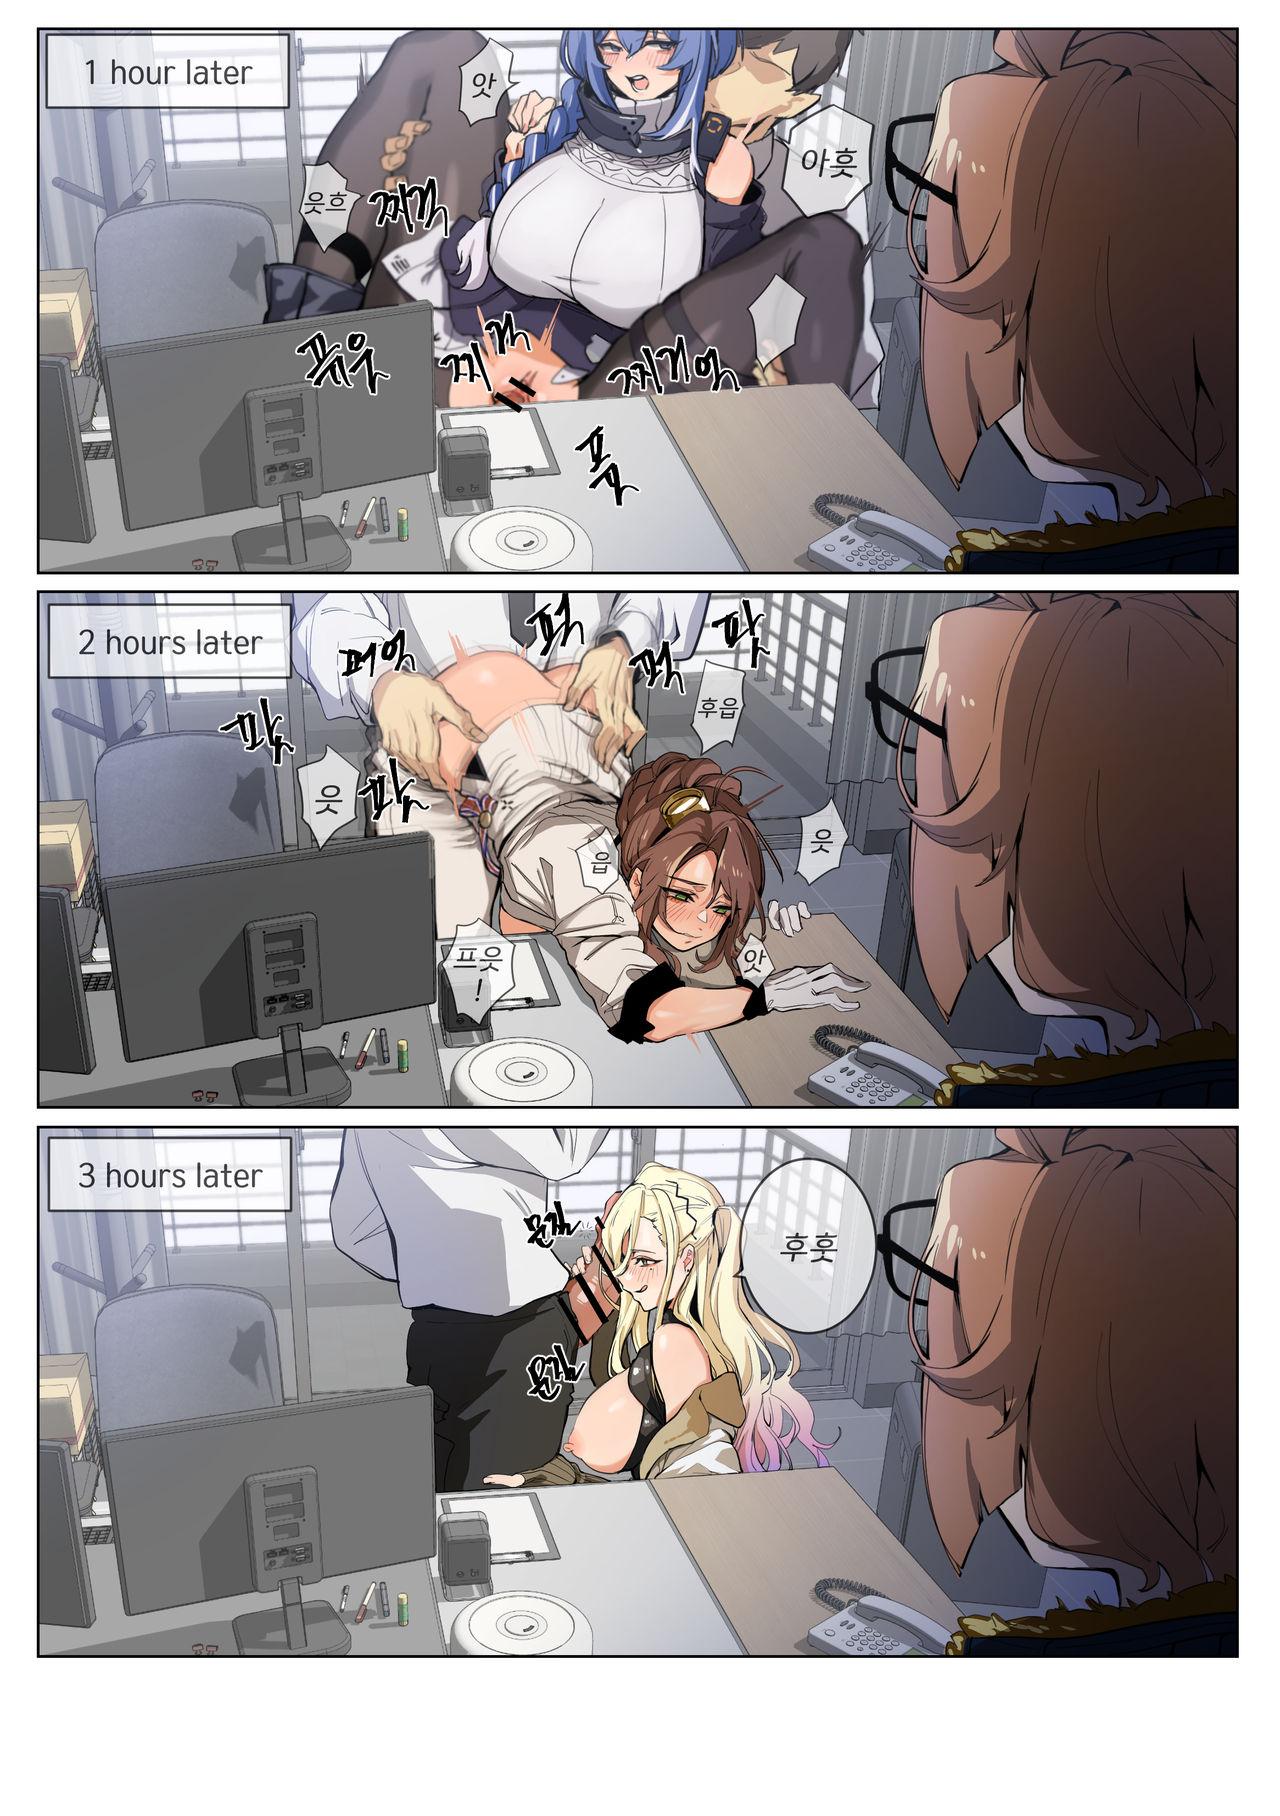 Shecock Grizzly - Girls frontline  - Page 4